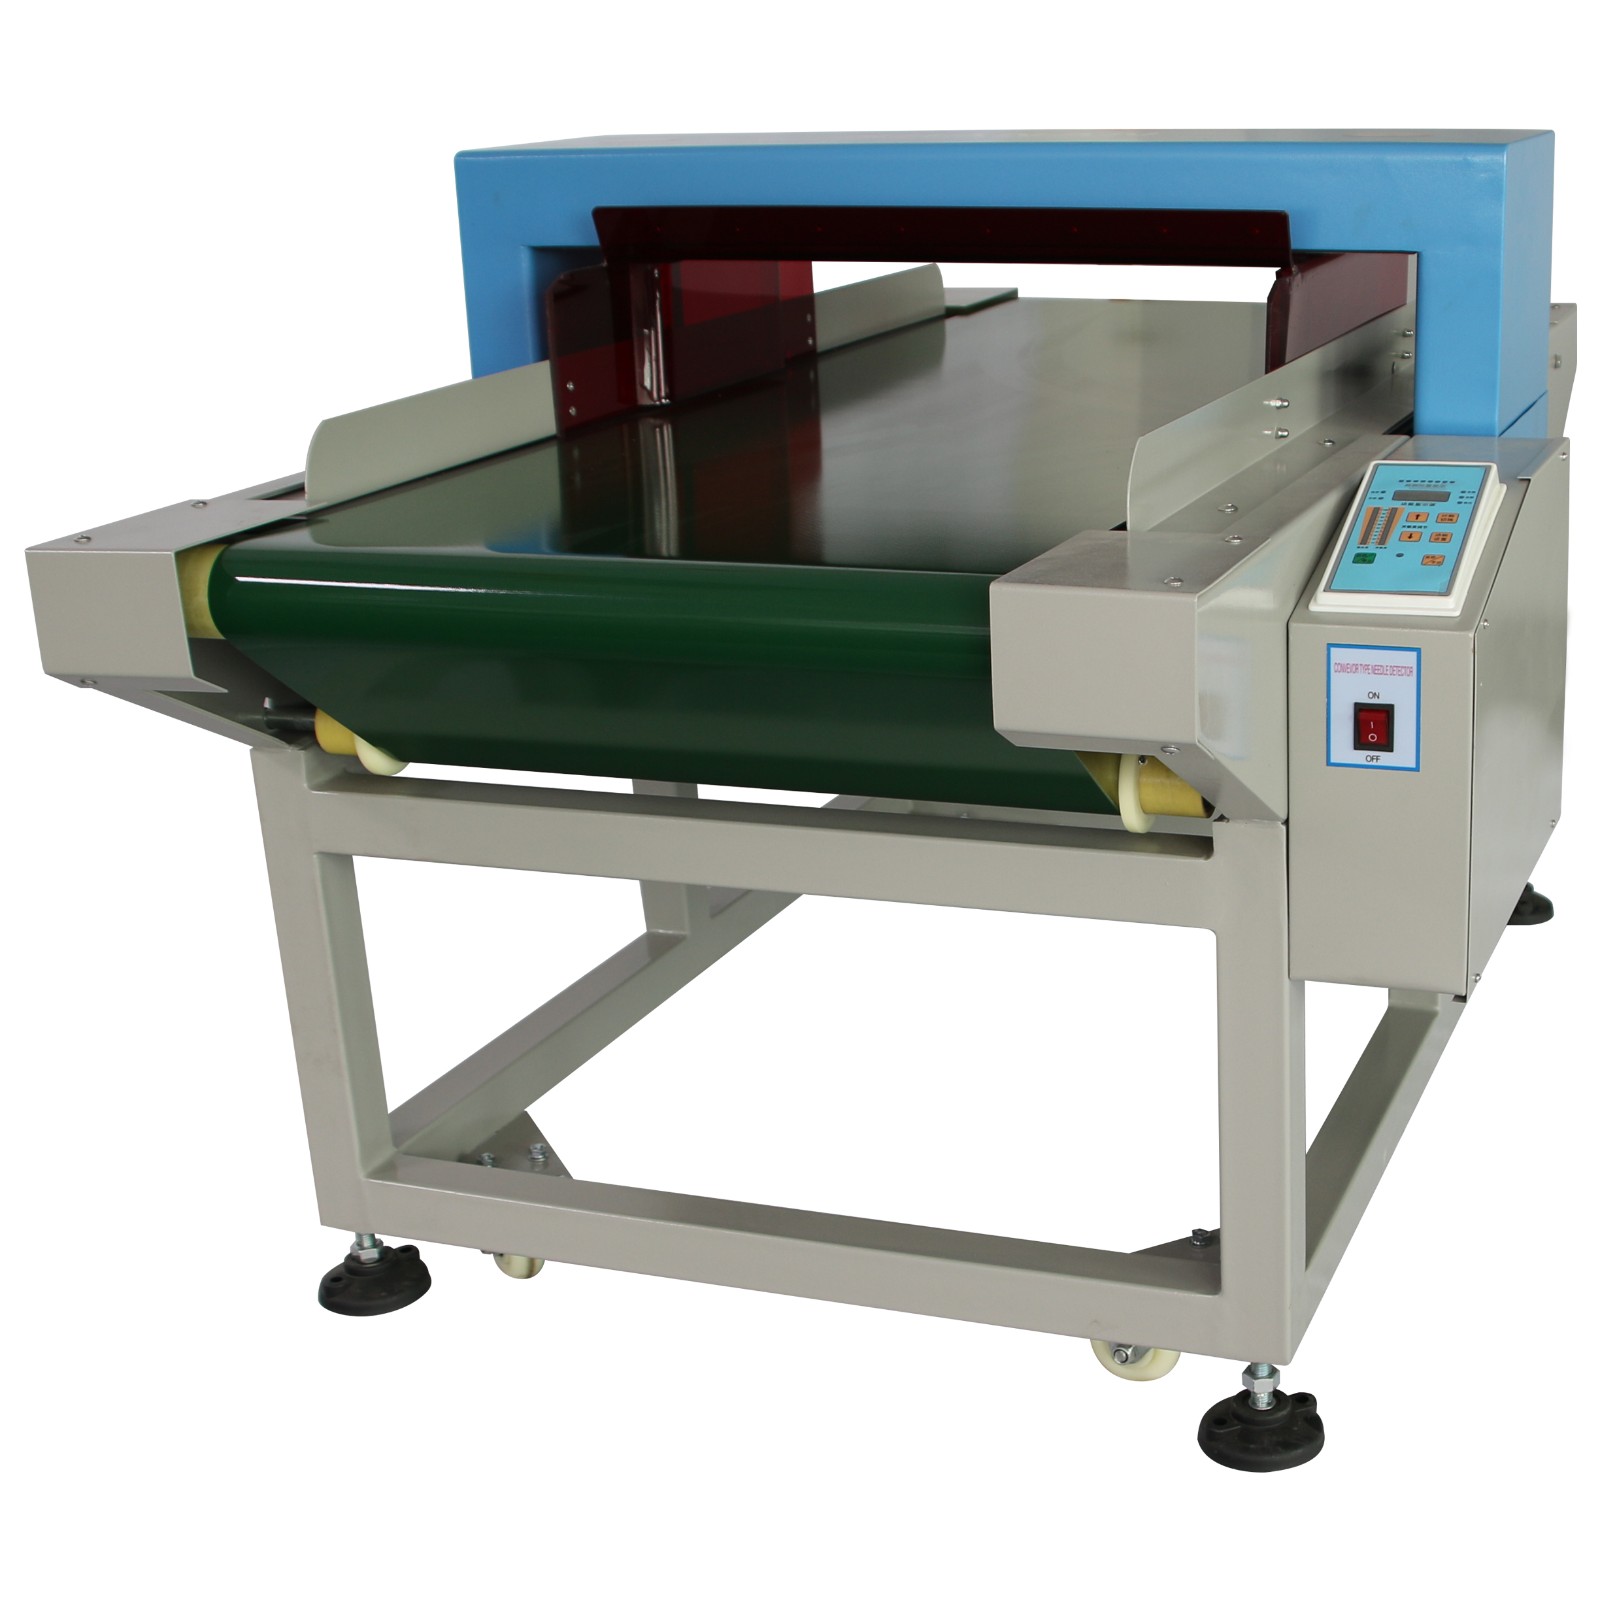 High-Performance Needle Detector Machines for Ensuring Product Purity and Safety